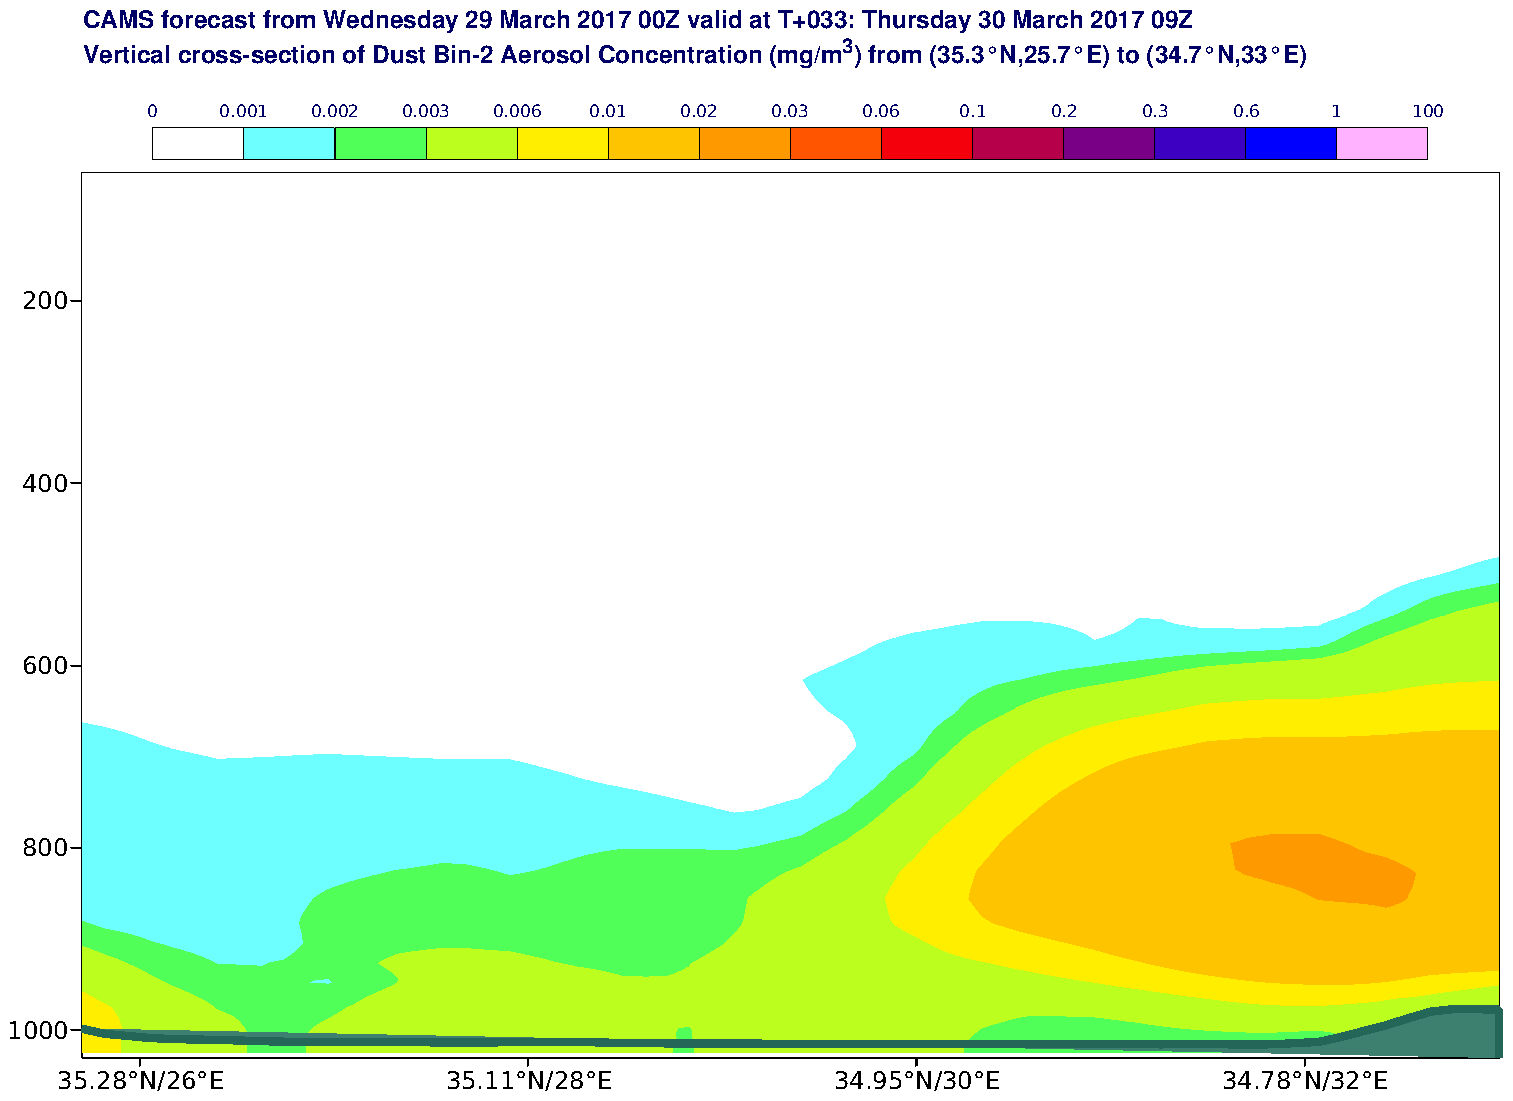 Vertical cross-section of Dust Bin-2 Aerosol Concentration (mg/m3) valid at T33 - 2017-03-30 09:00